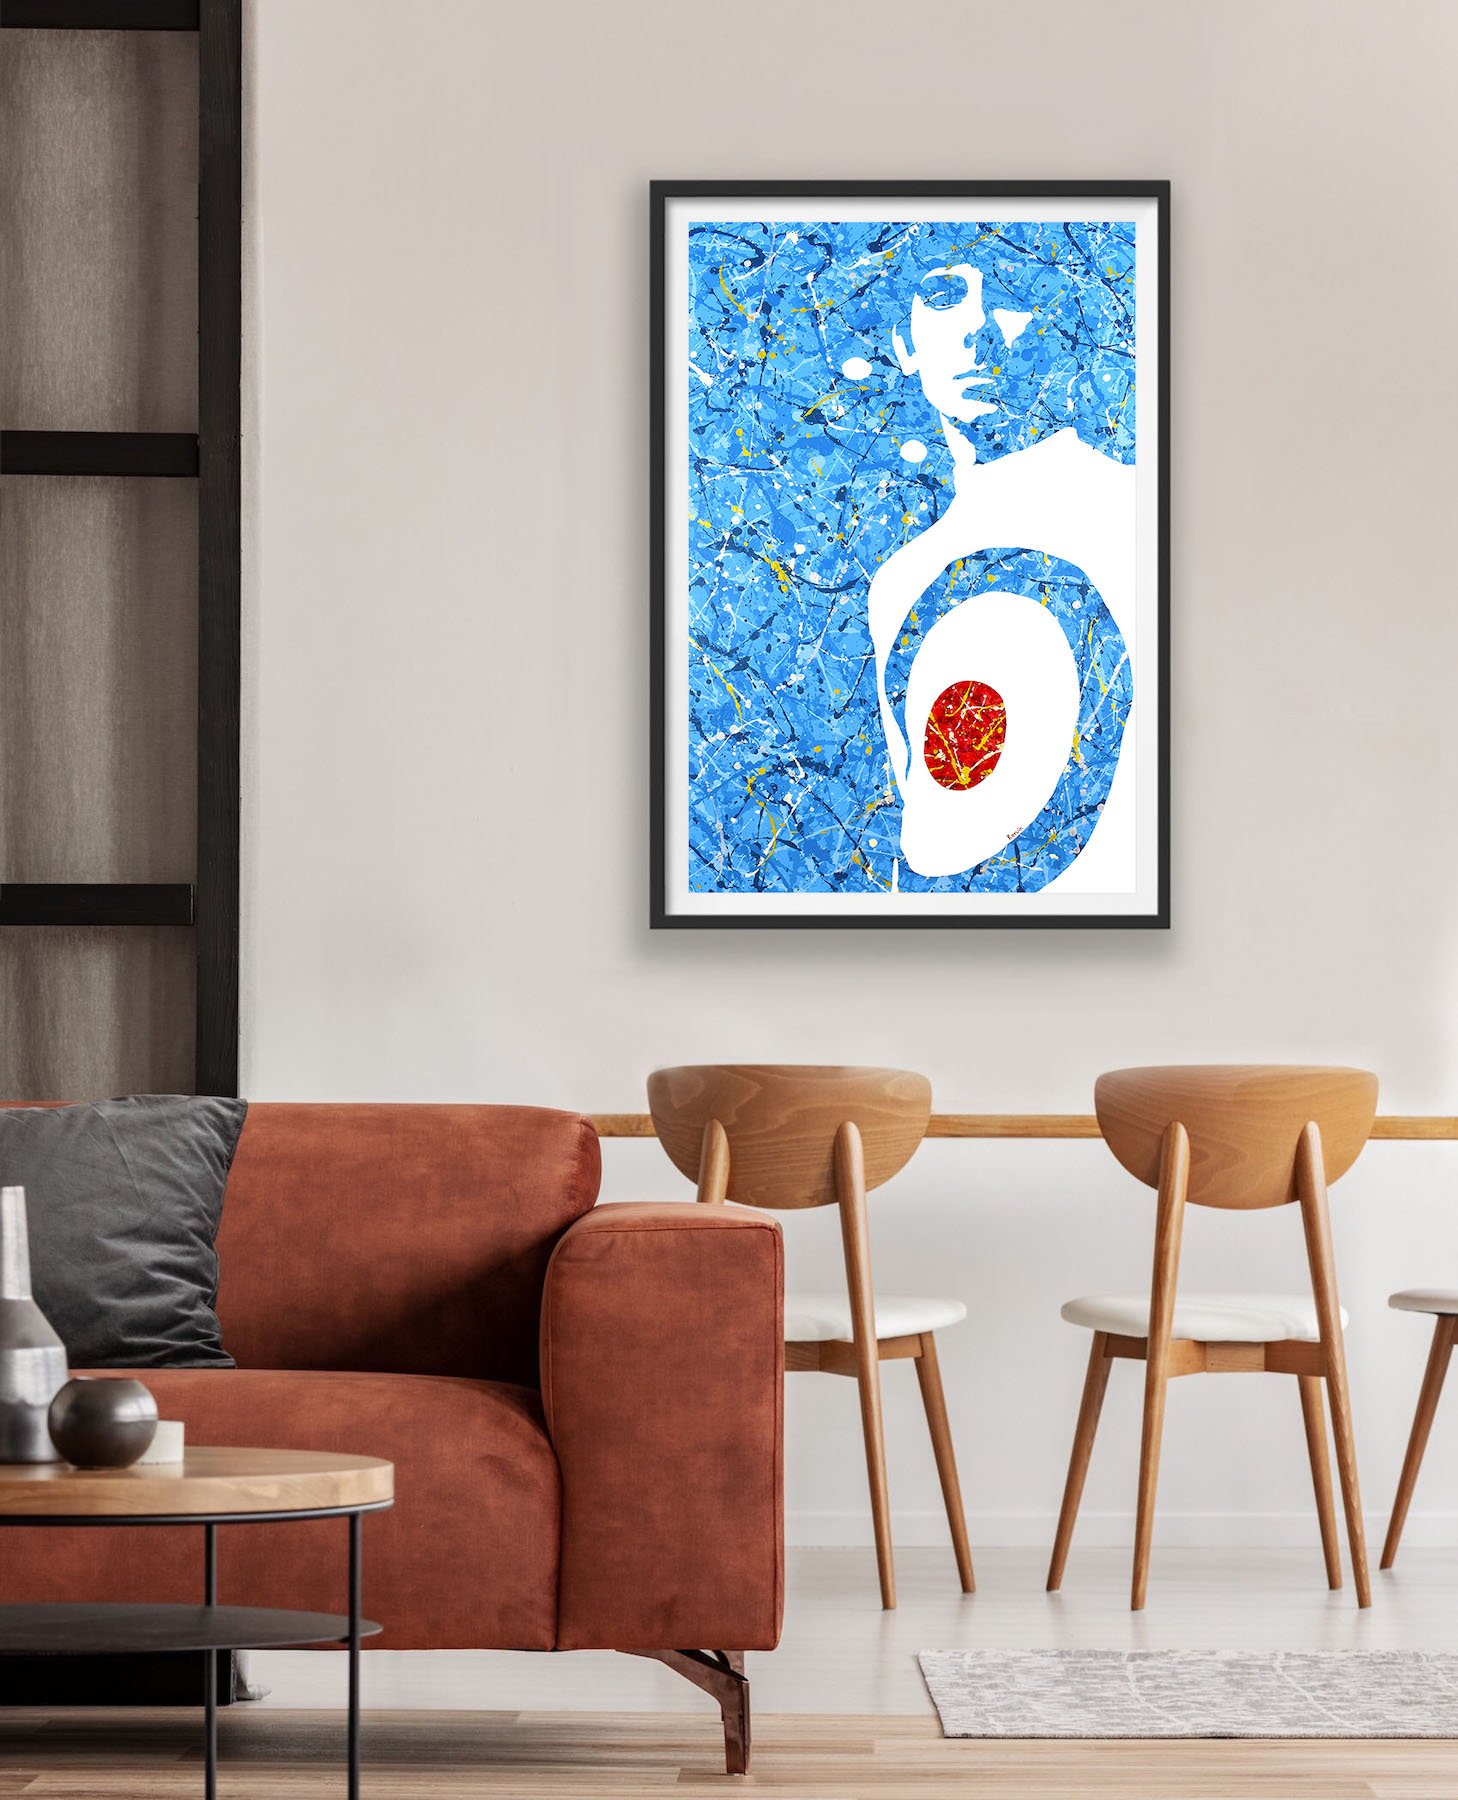 The Who painting By Kerwin